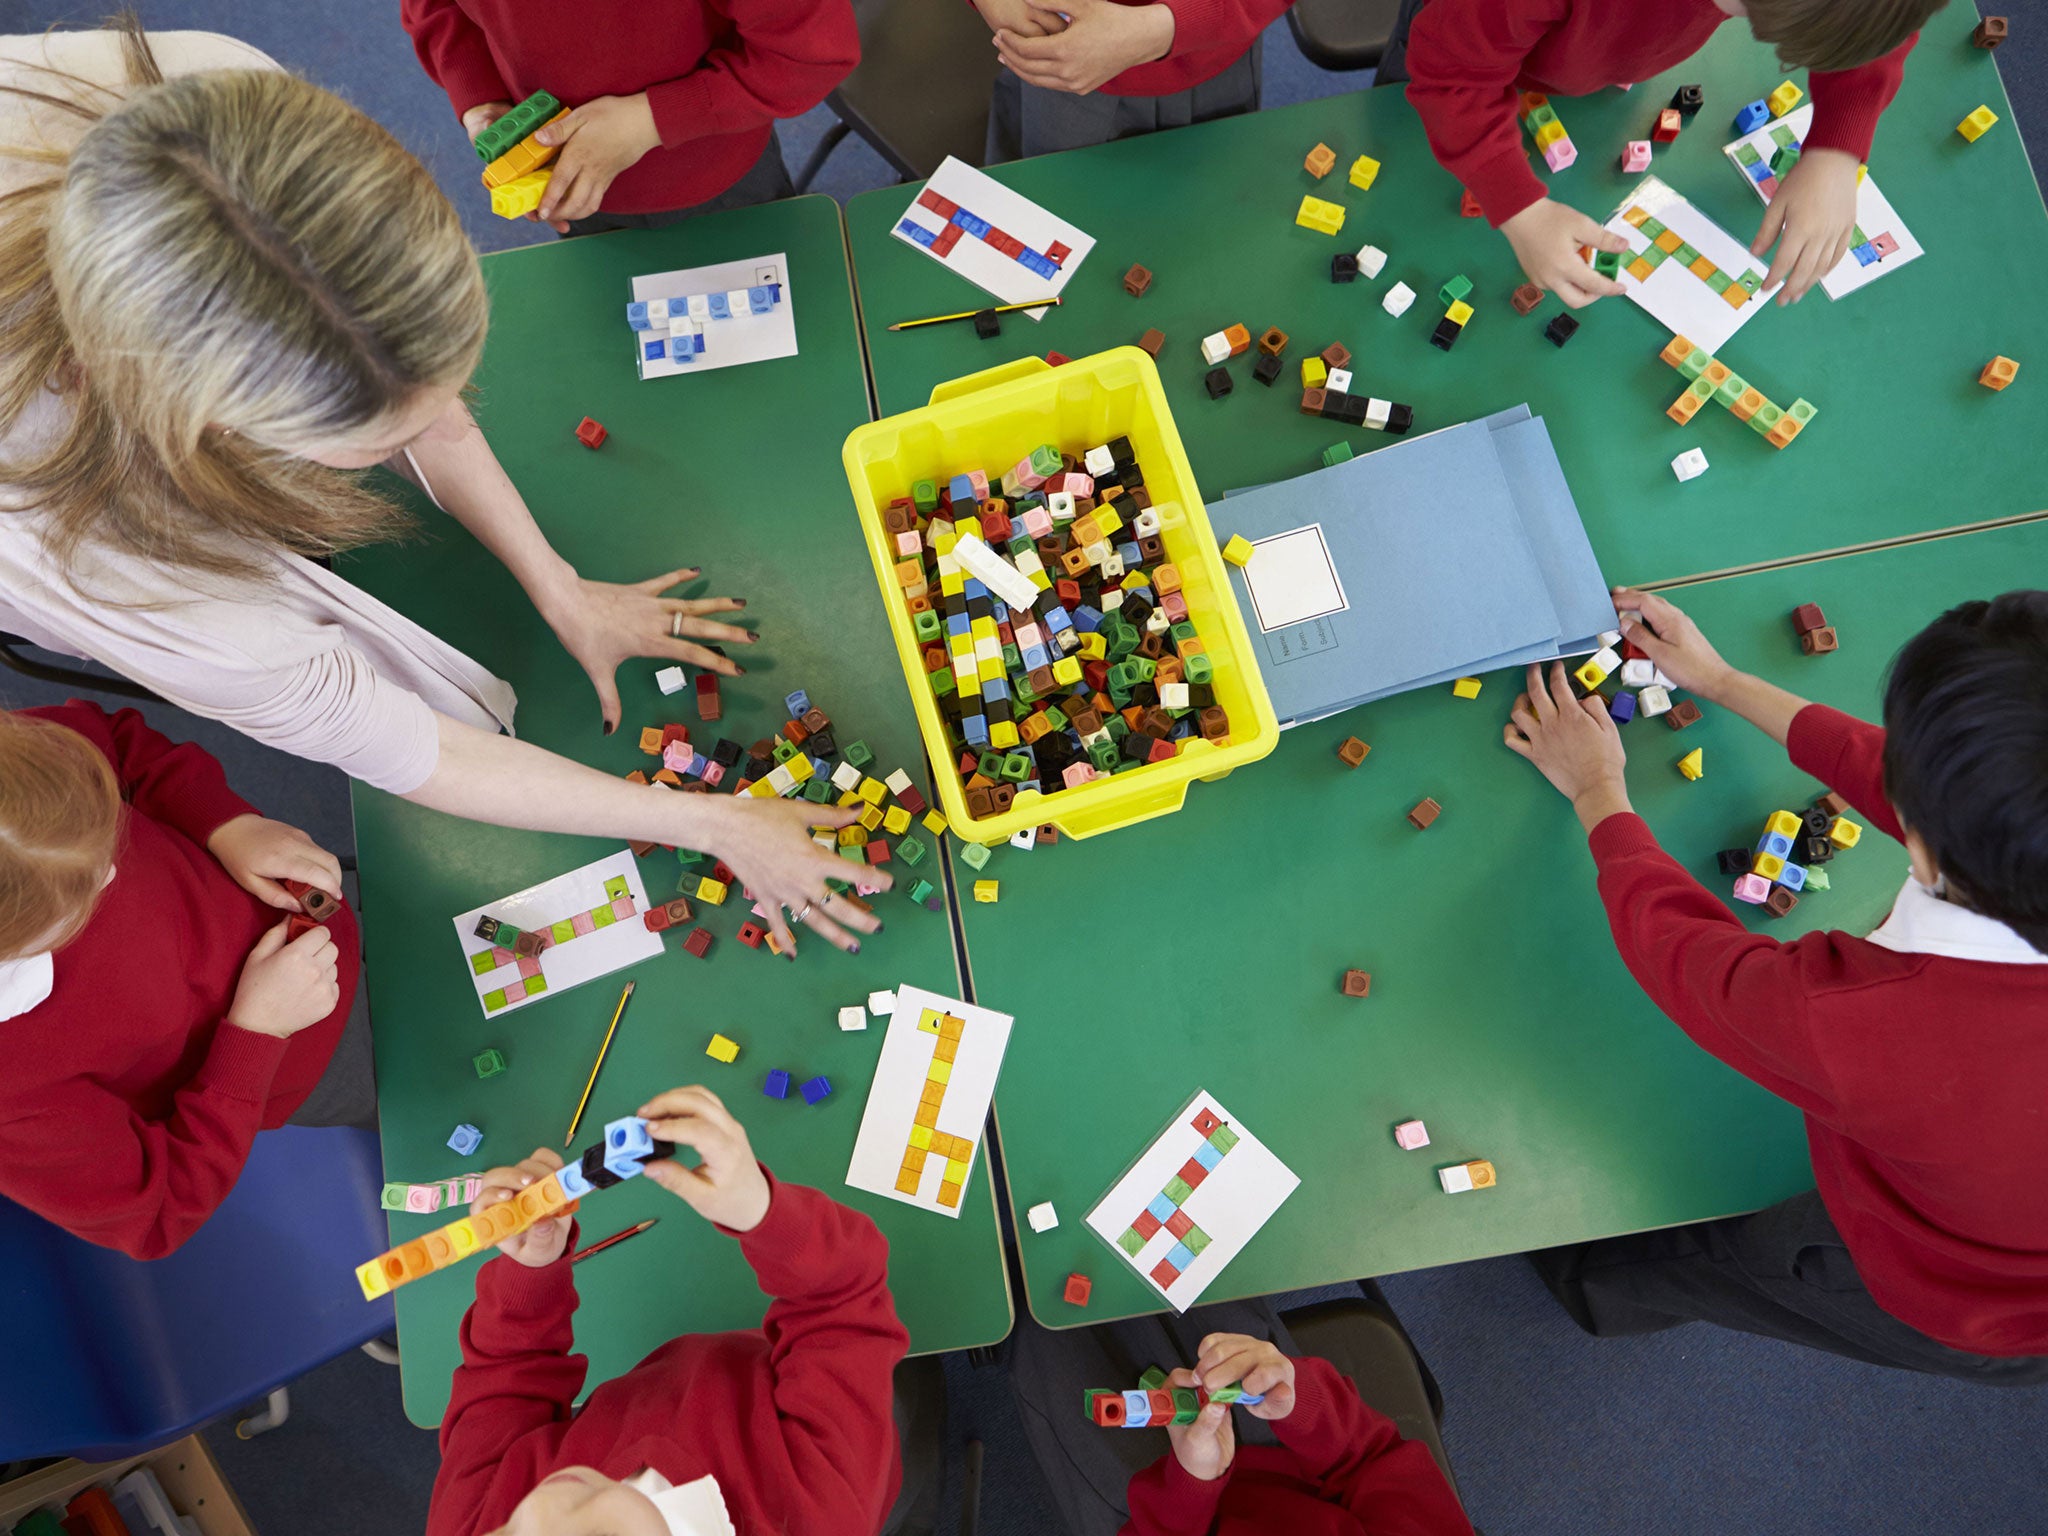 Forecasts show that 295,000 more primary-age pupils will be enrolled in schools by 2020